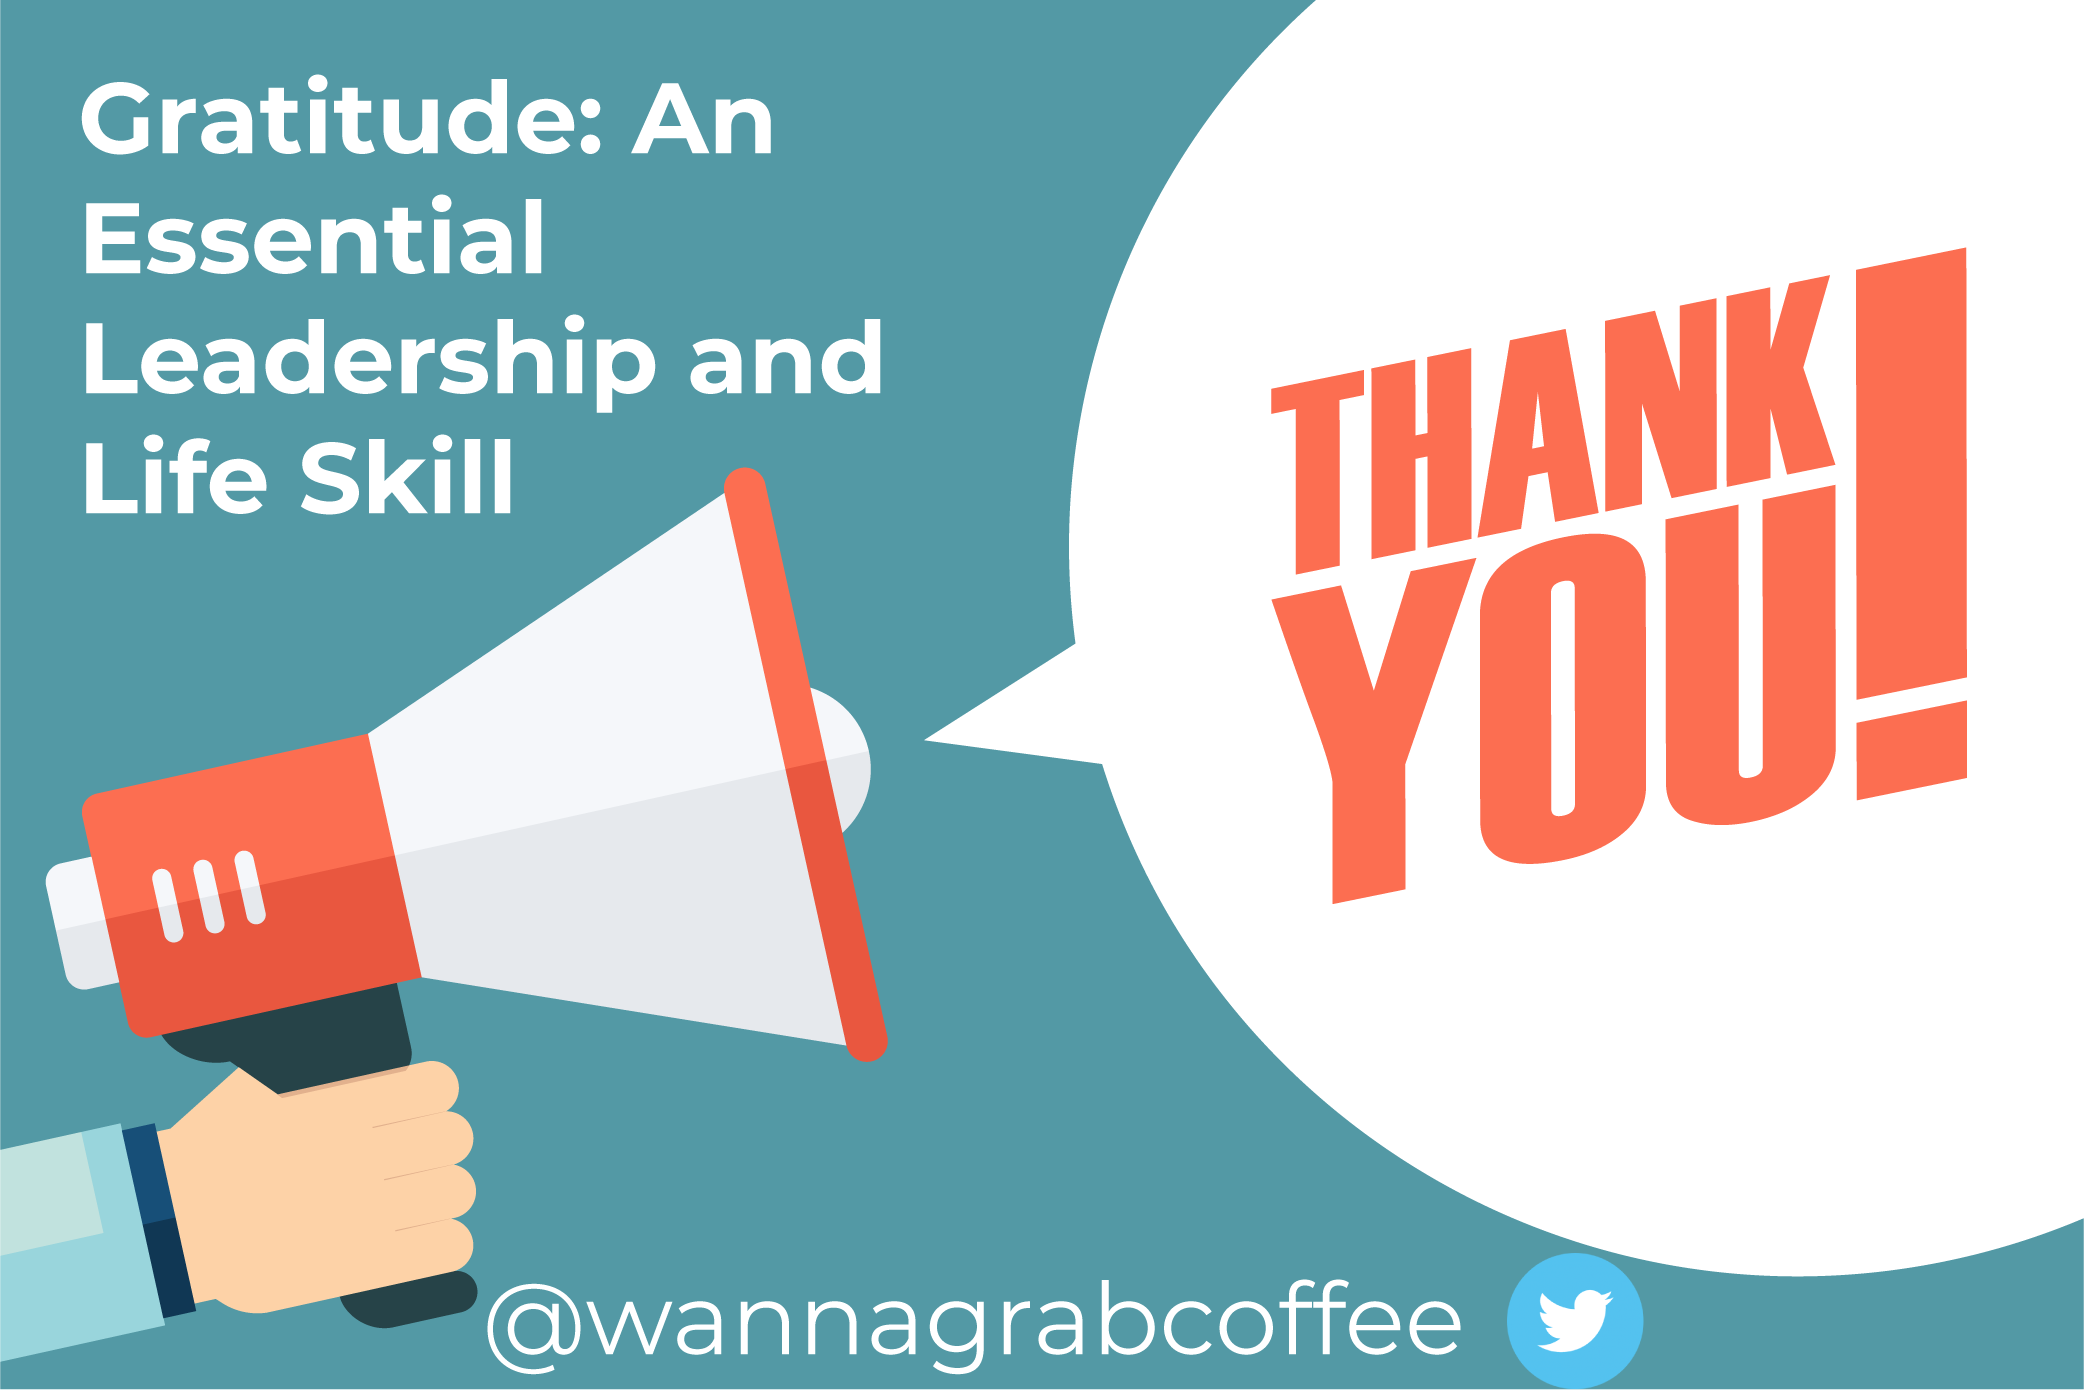 Gratitude: An Essential Leadership and Life Skill